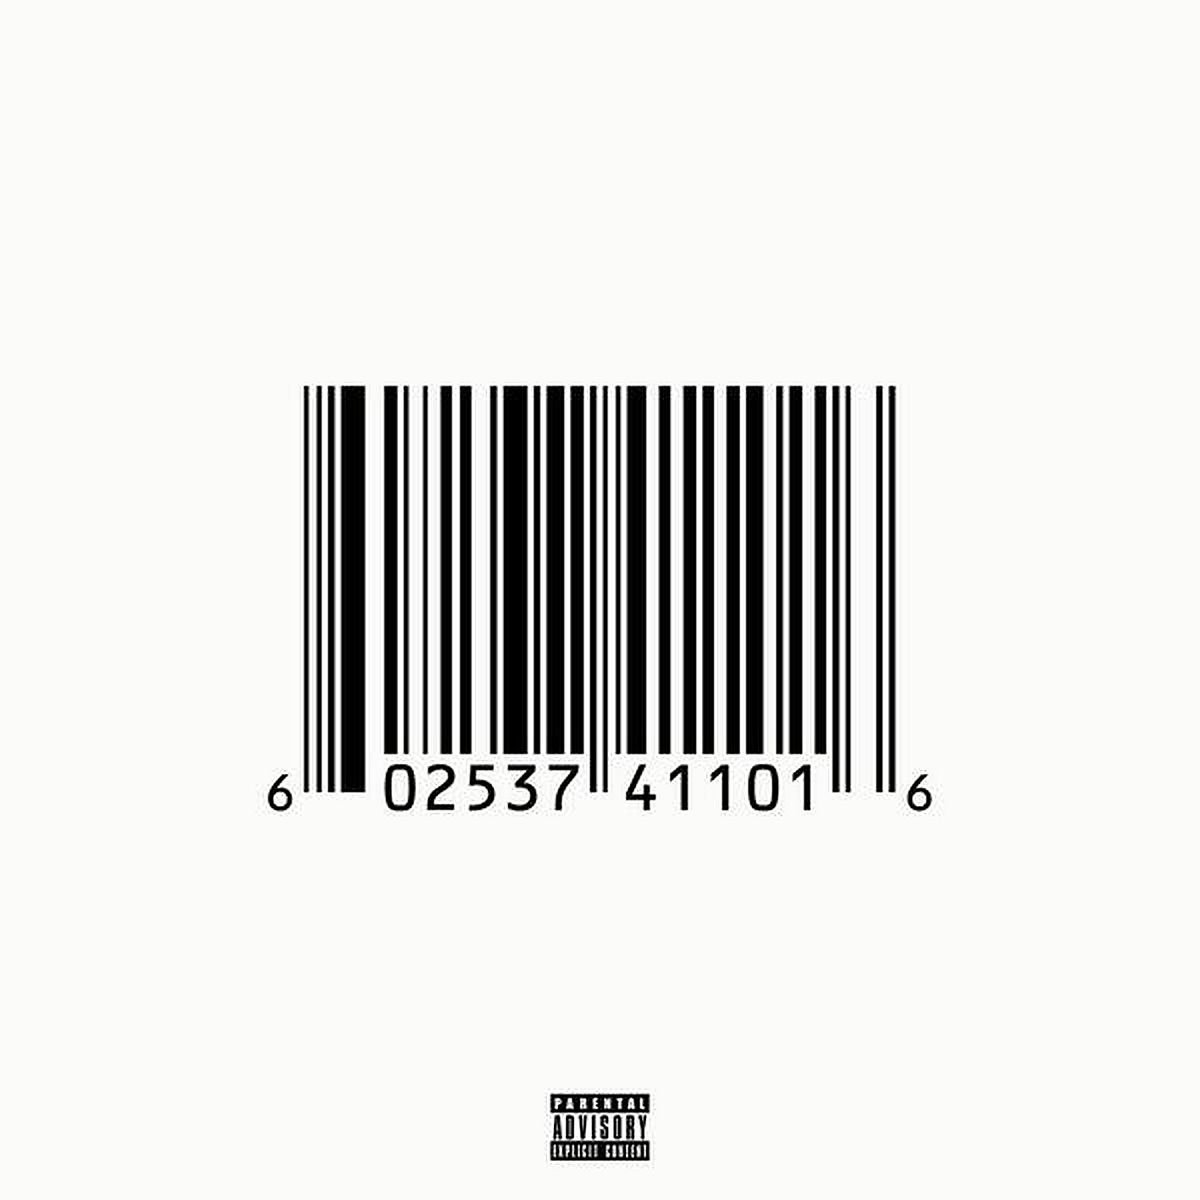 Pusha T - My Name Is My Name